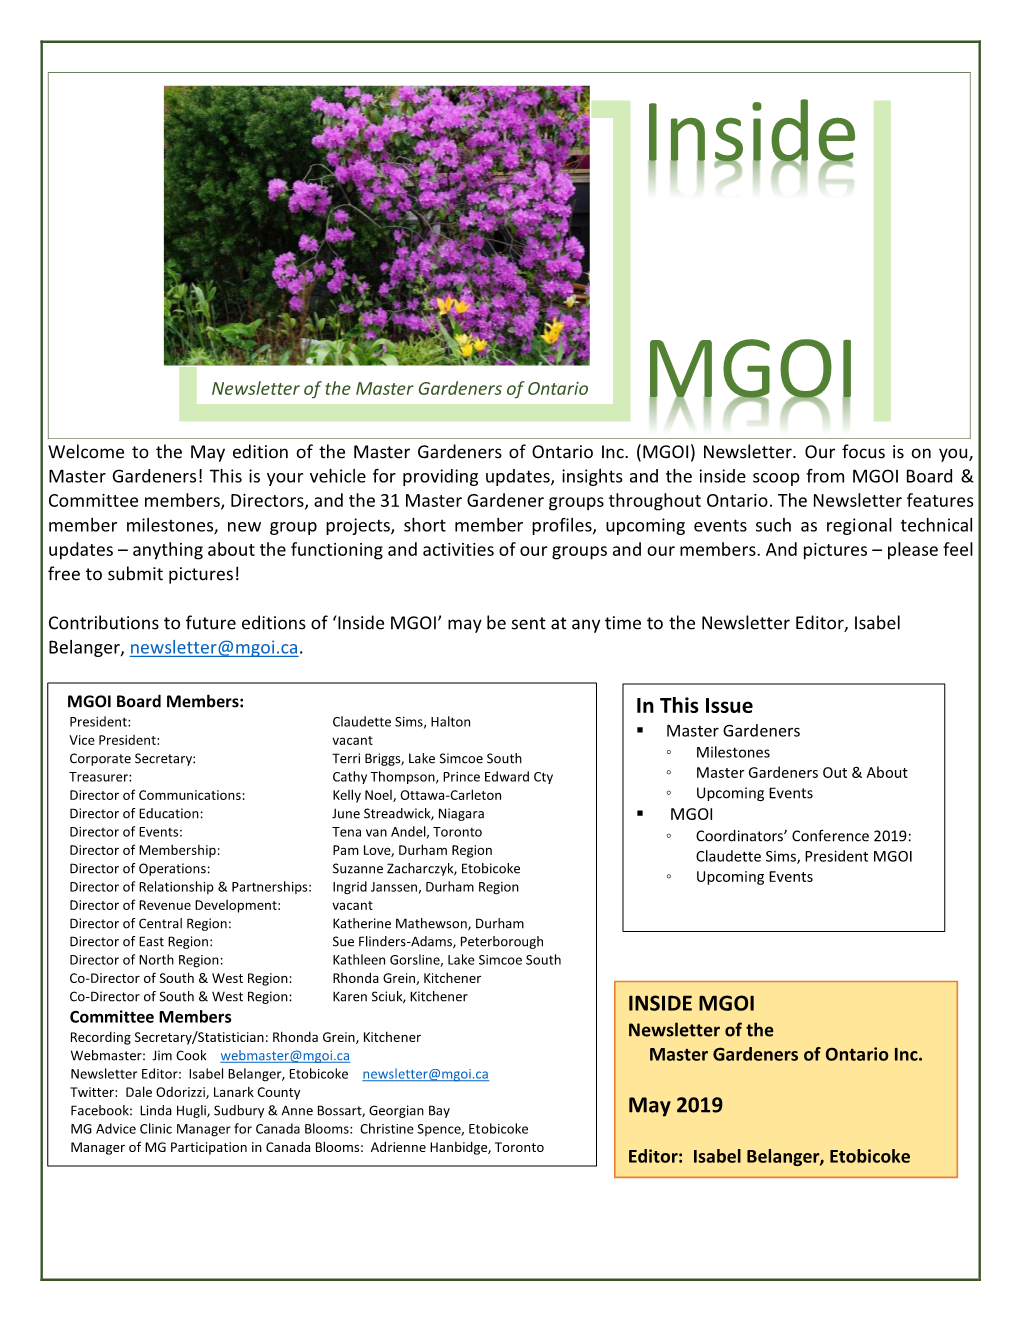 Inside MGOI’ May Be Sent at Any Time to the Newsletter Editor, Isabel Belanger, Newsletter@Mgoi.Ca